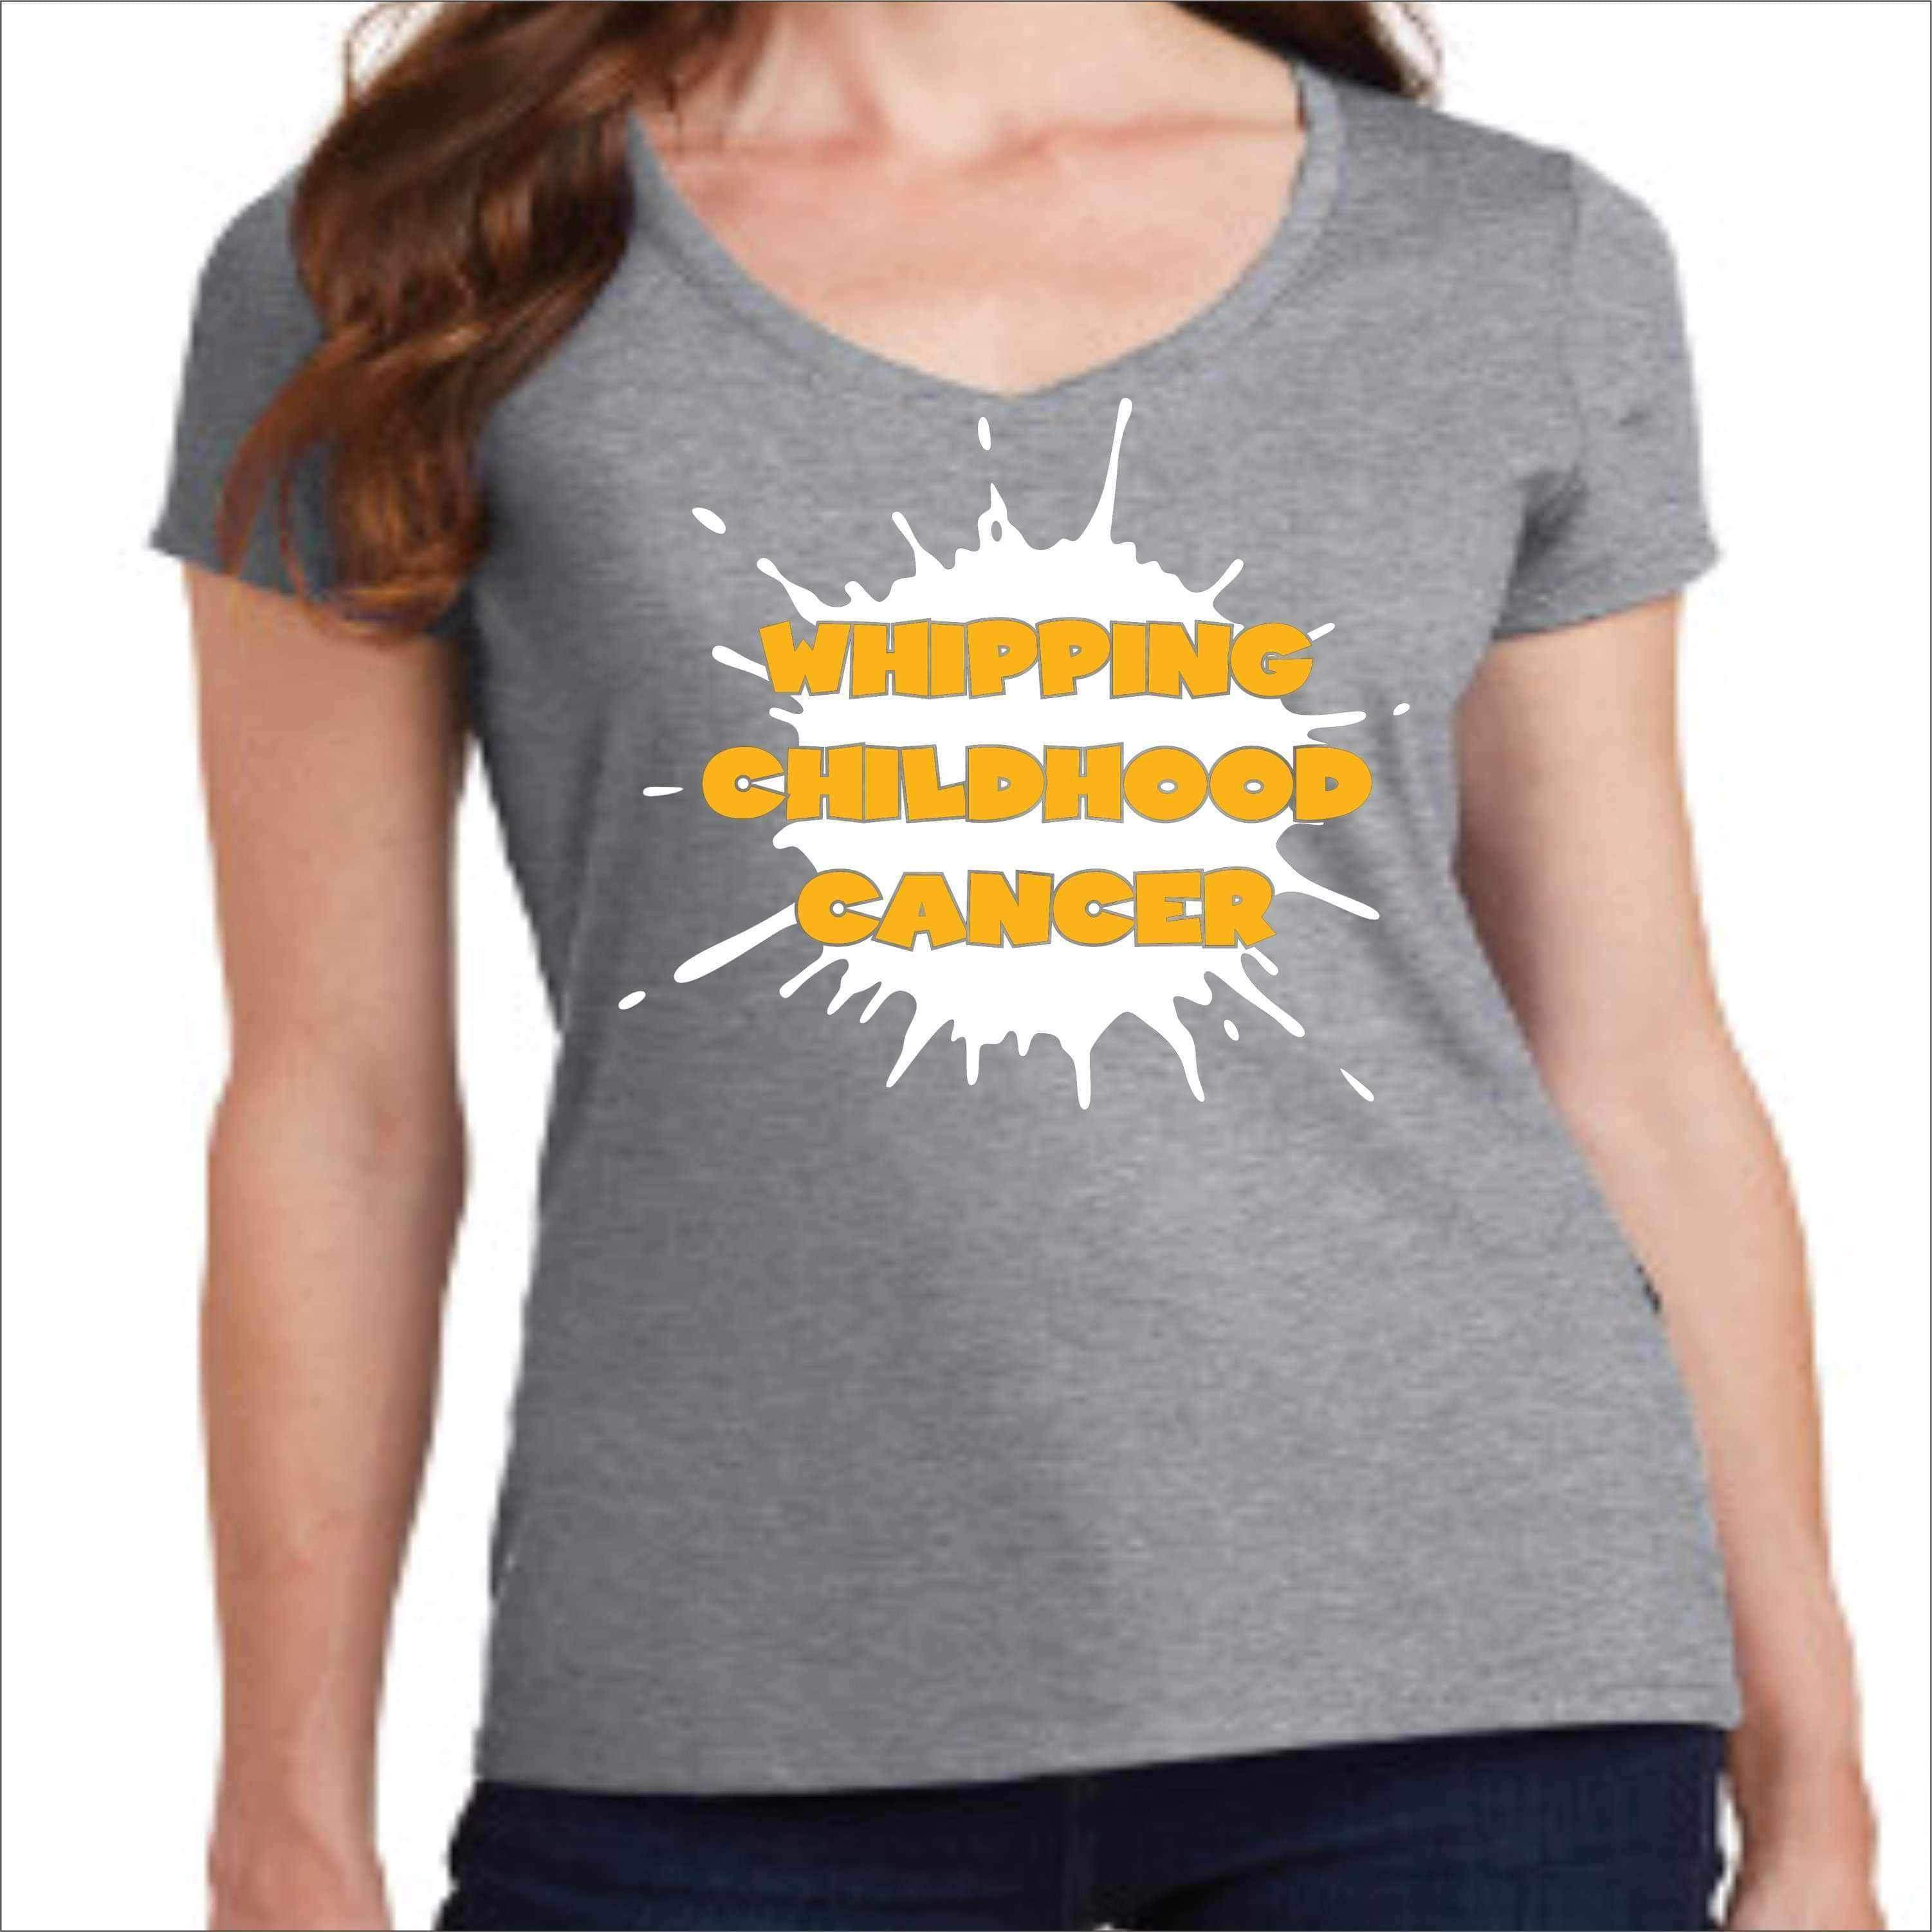 Whipping Childhood Cancer Short Sleeve V-Neck Screen Printed T-Shirt VIEW ALL DESIGNS Becky's Boutique Womens Extra-small Gray 